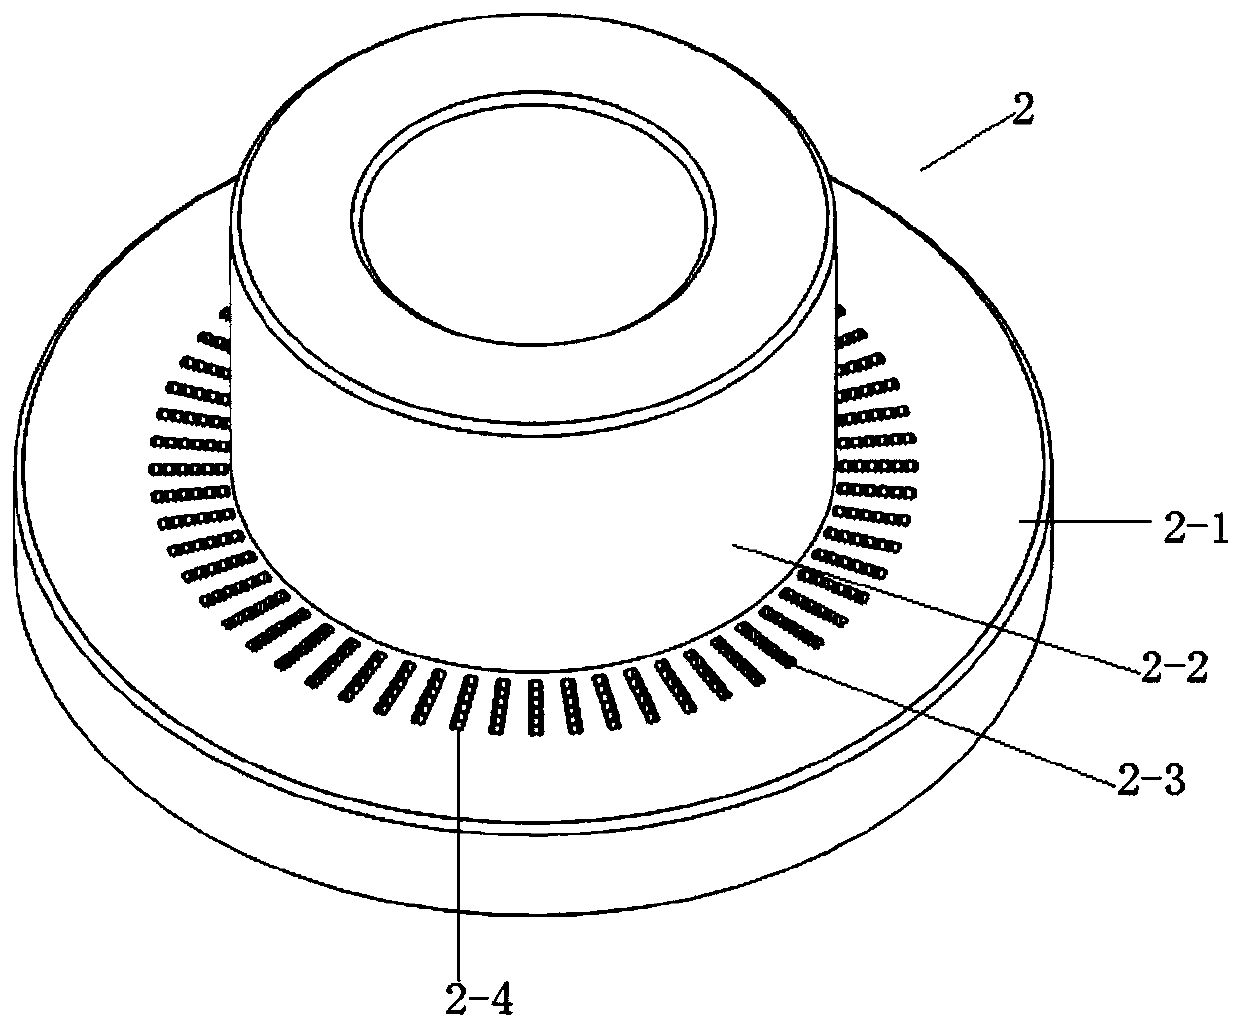 Method for embedding flat copper wire by using split stator core